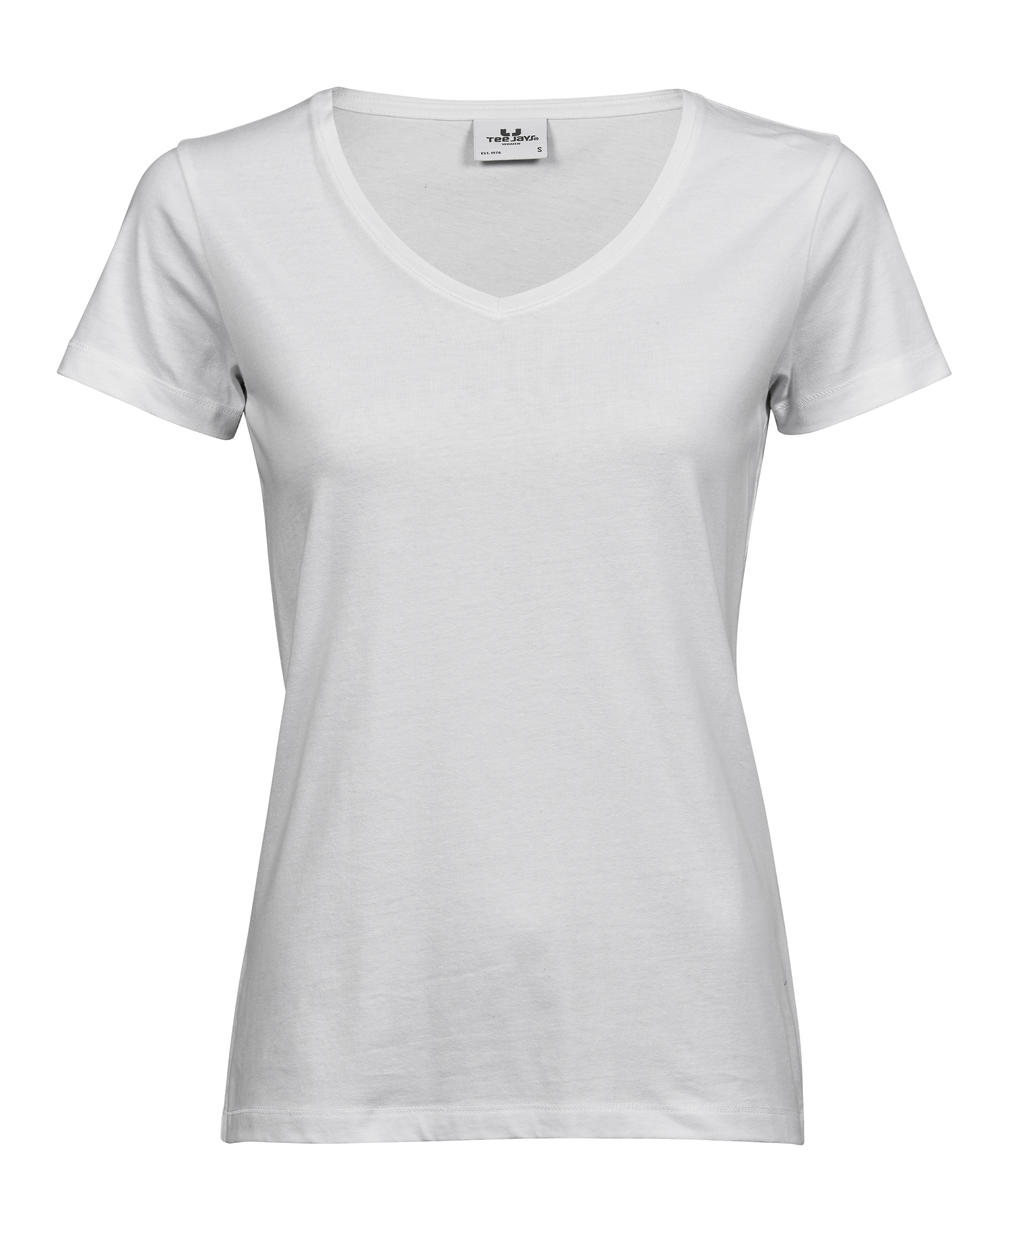  Womens Luxury V-Neck Tee in Farbe White